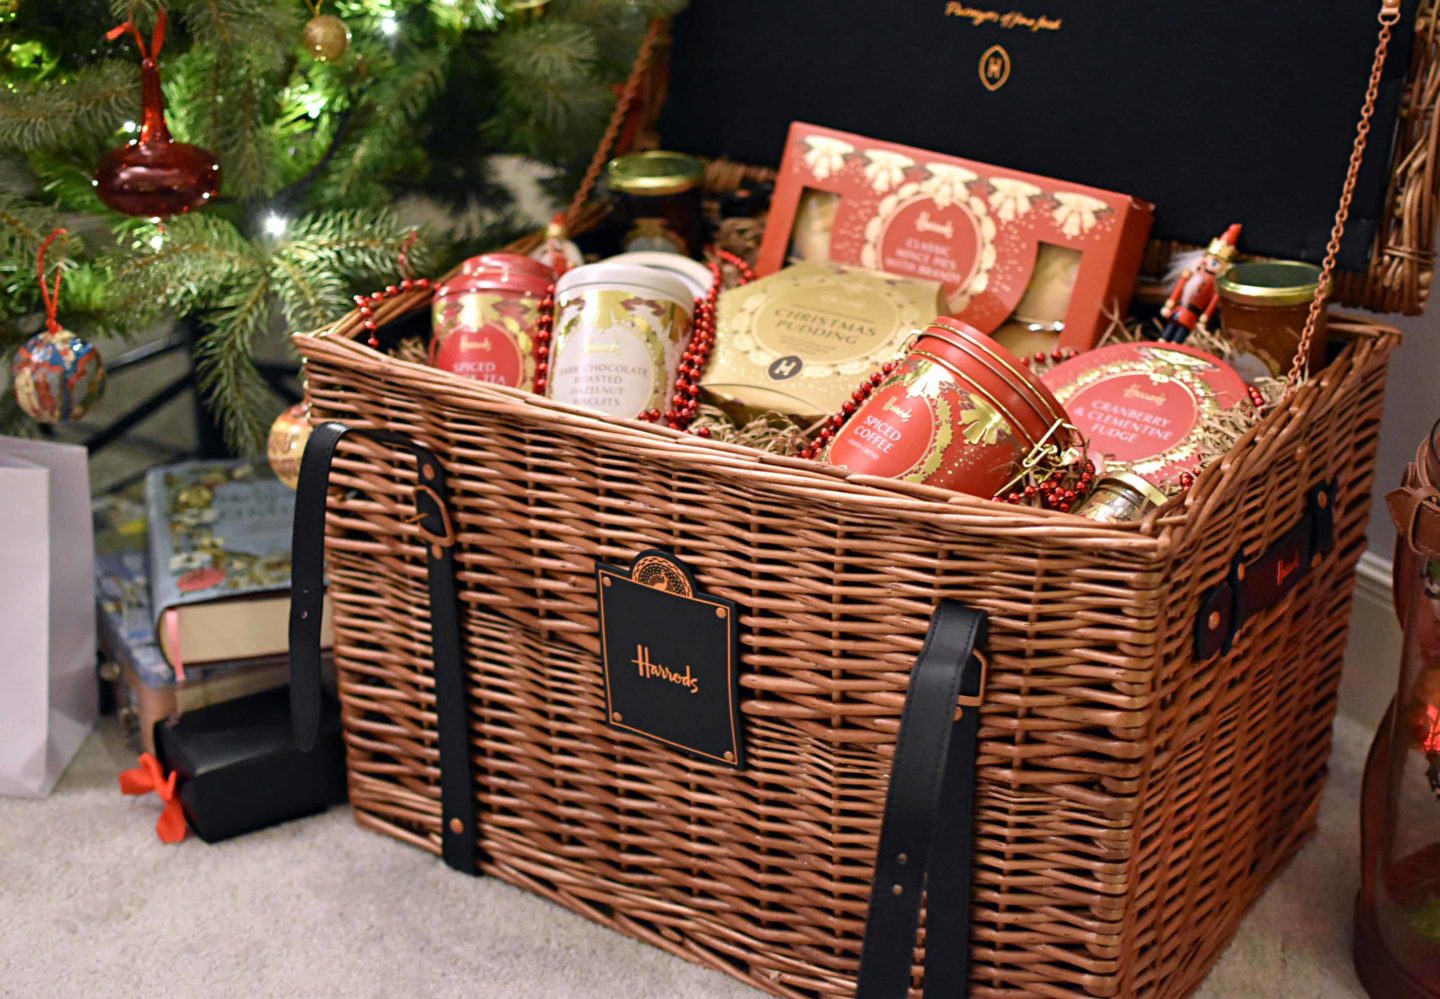 Getting Festive With Harrods Hampers An Early Christmas Surprise The Foodaholic